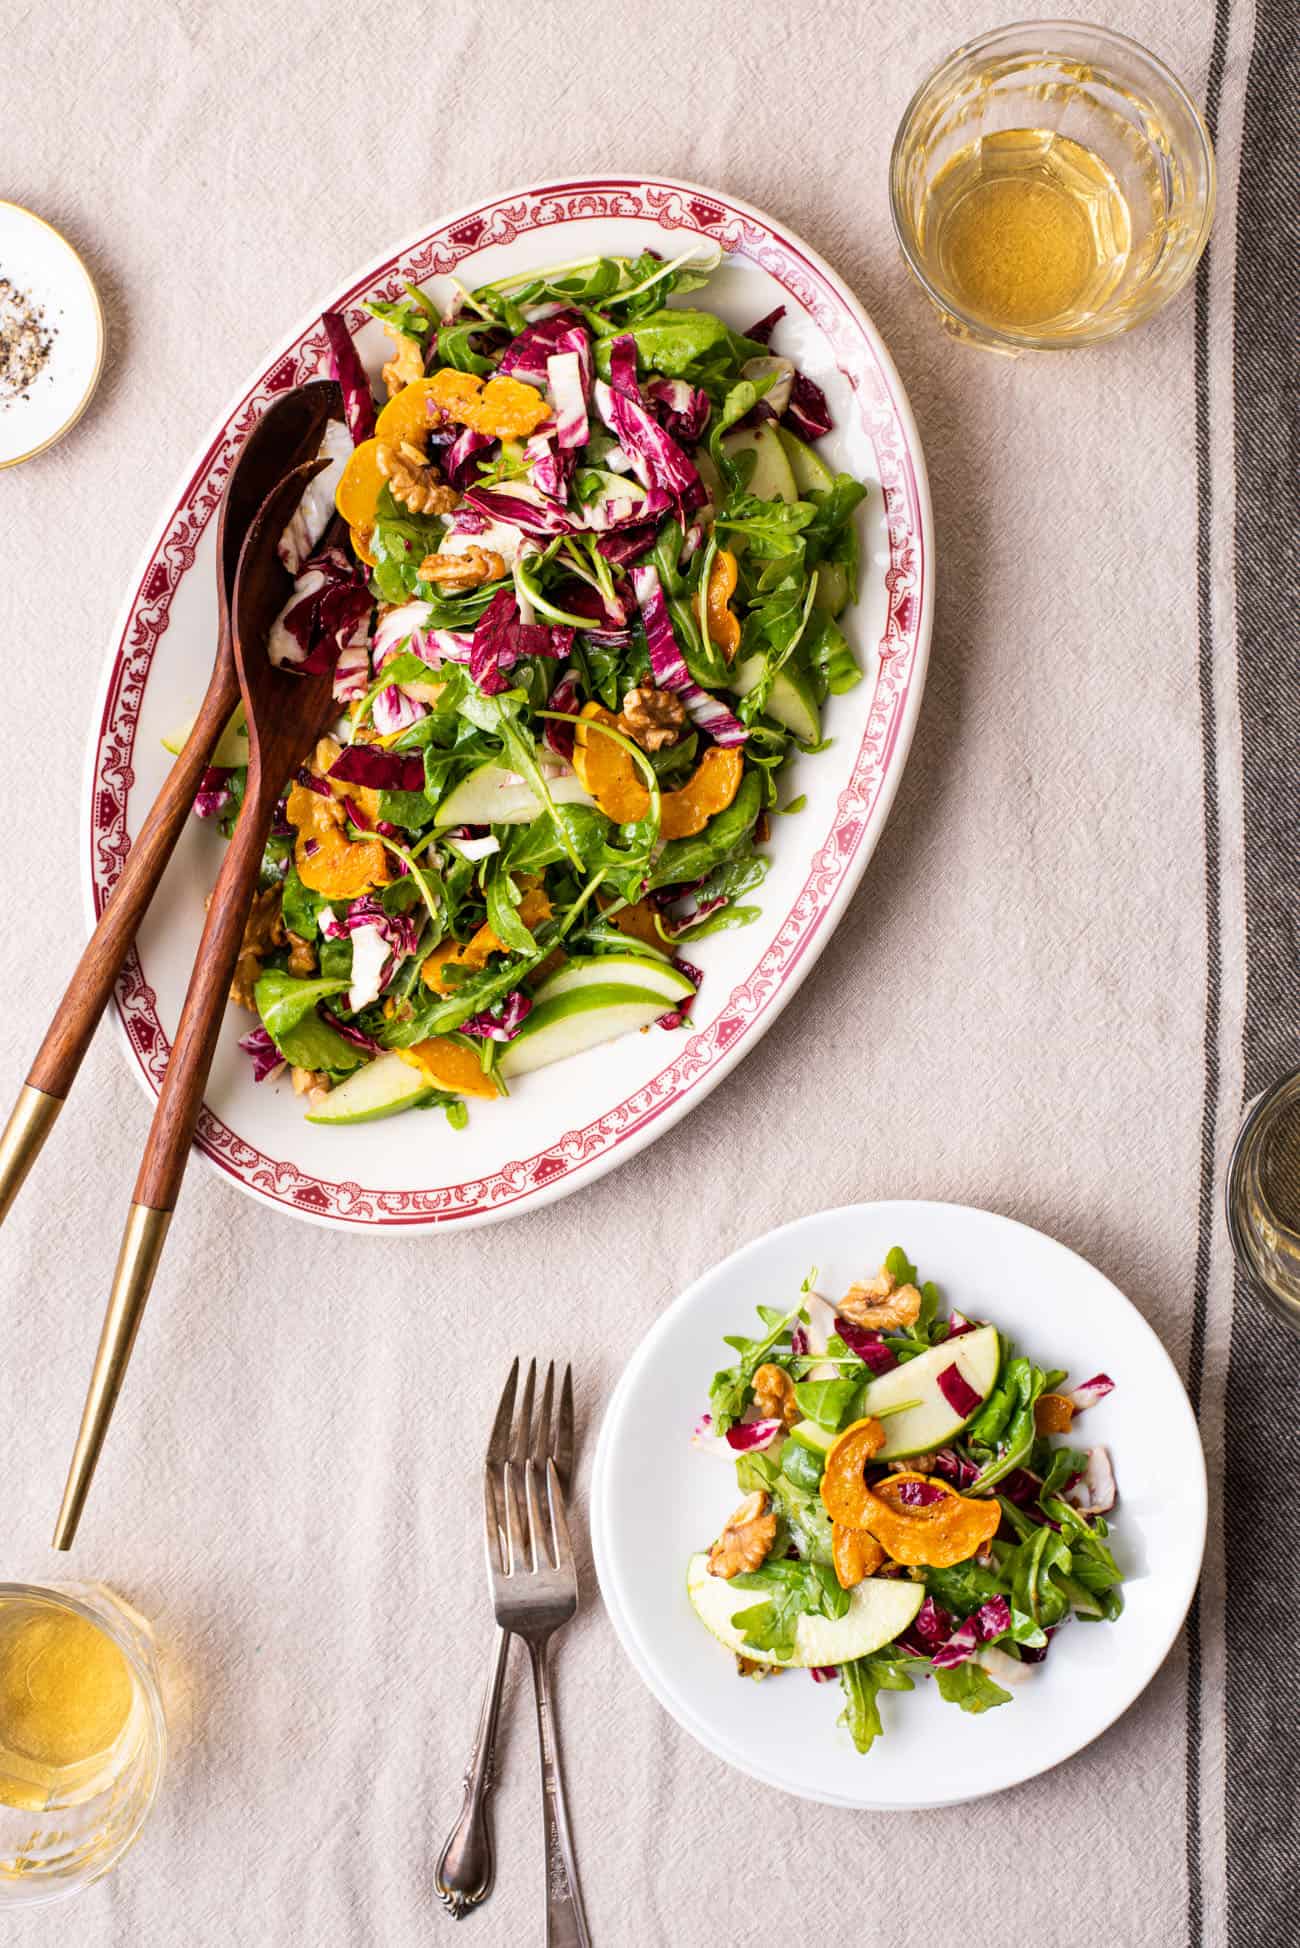 Arugula radicchio salad with delicata squash on an oval platter next to a stack of plates on a beige tablecloth